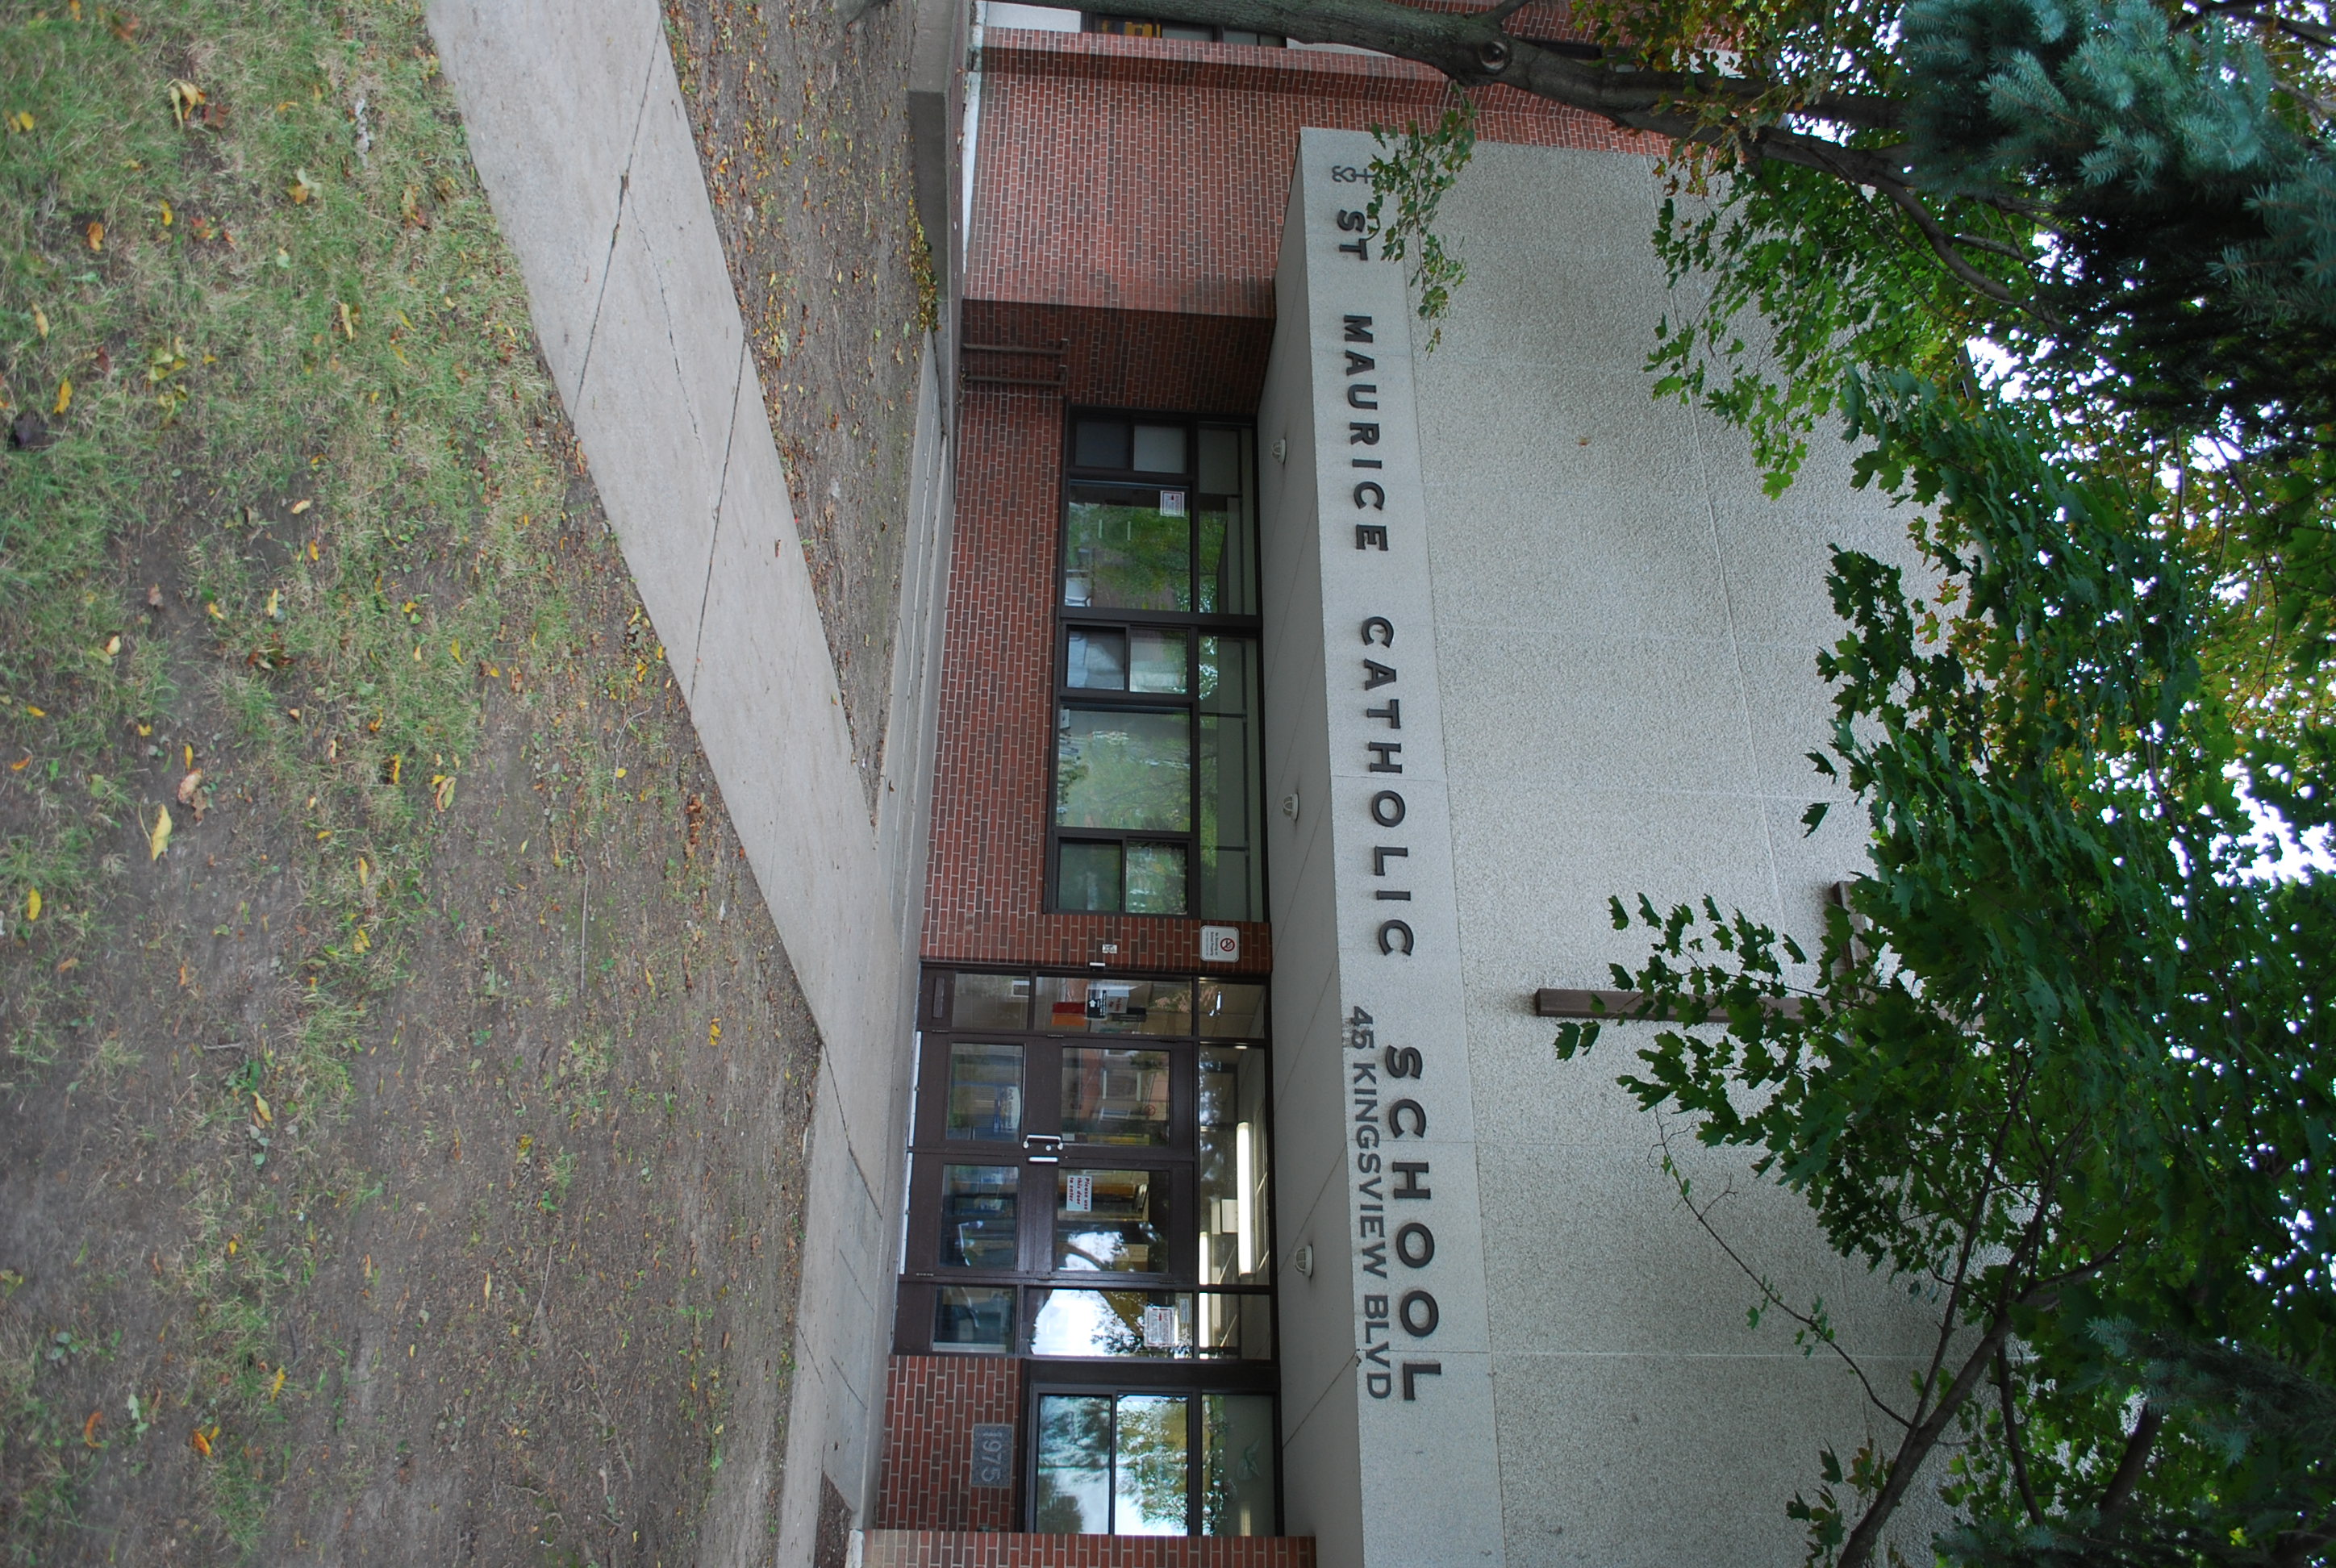 The front of the St. Maurice Catholic School building.